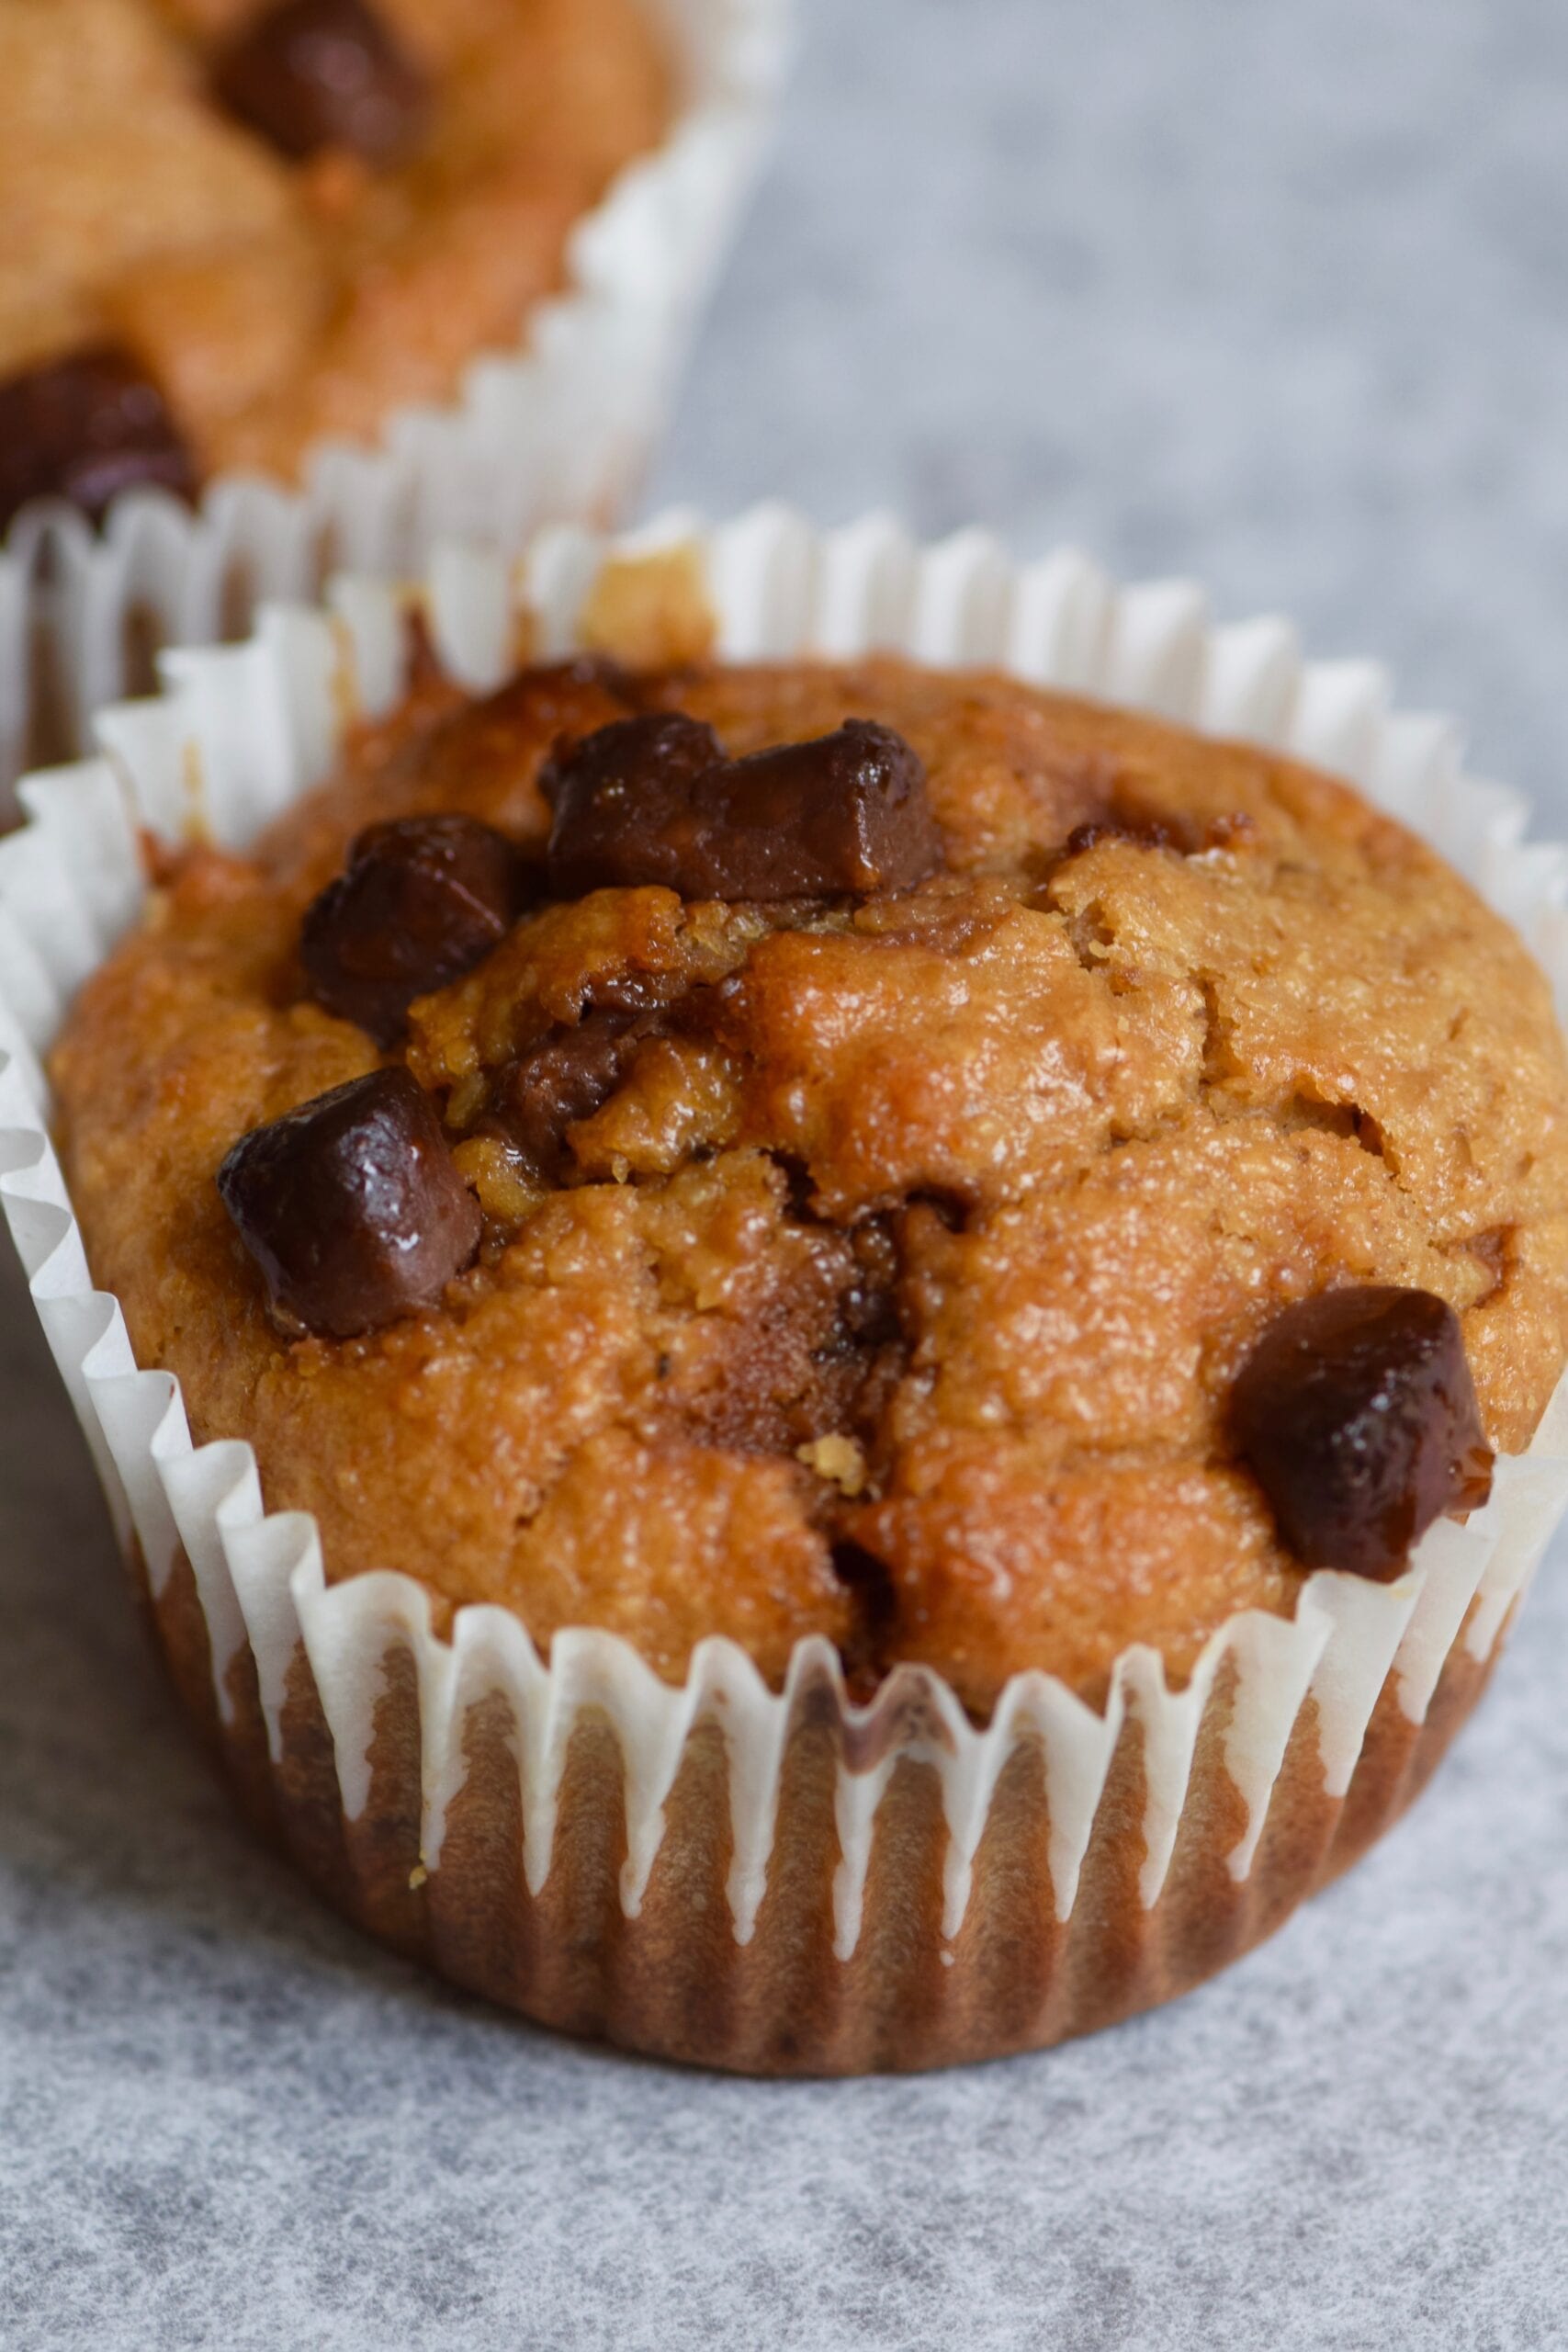 Chocolate chip healthy oatmeal breakfast muffins